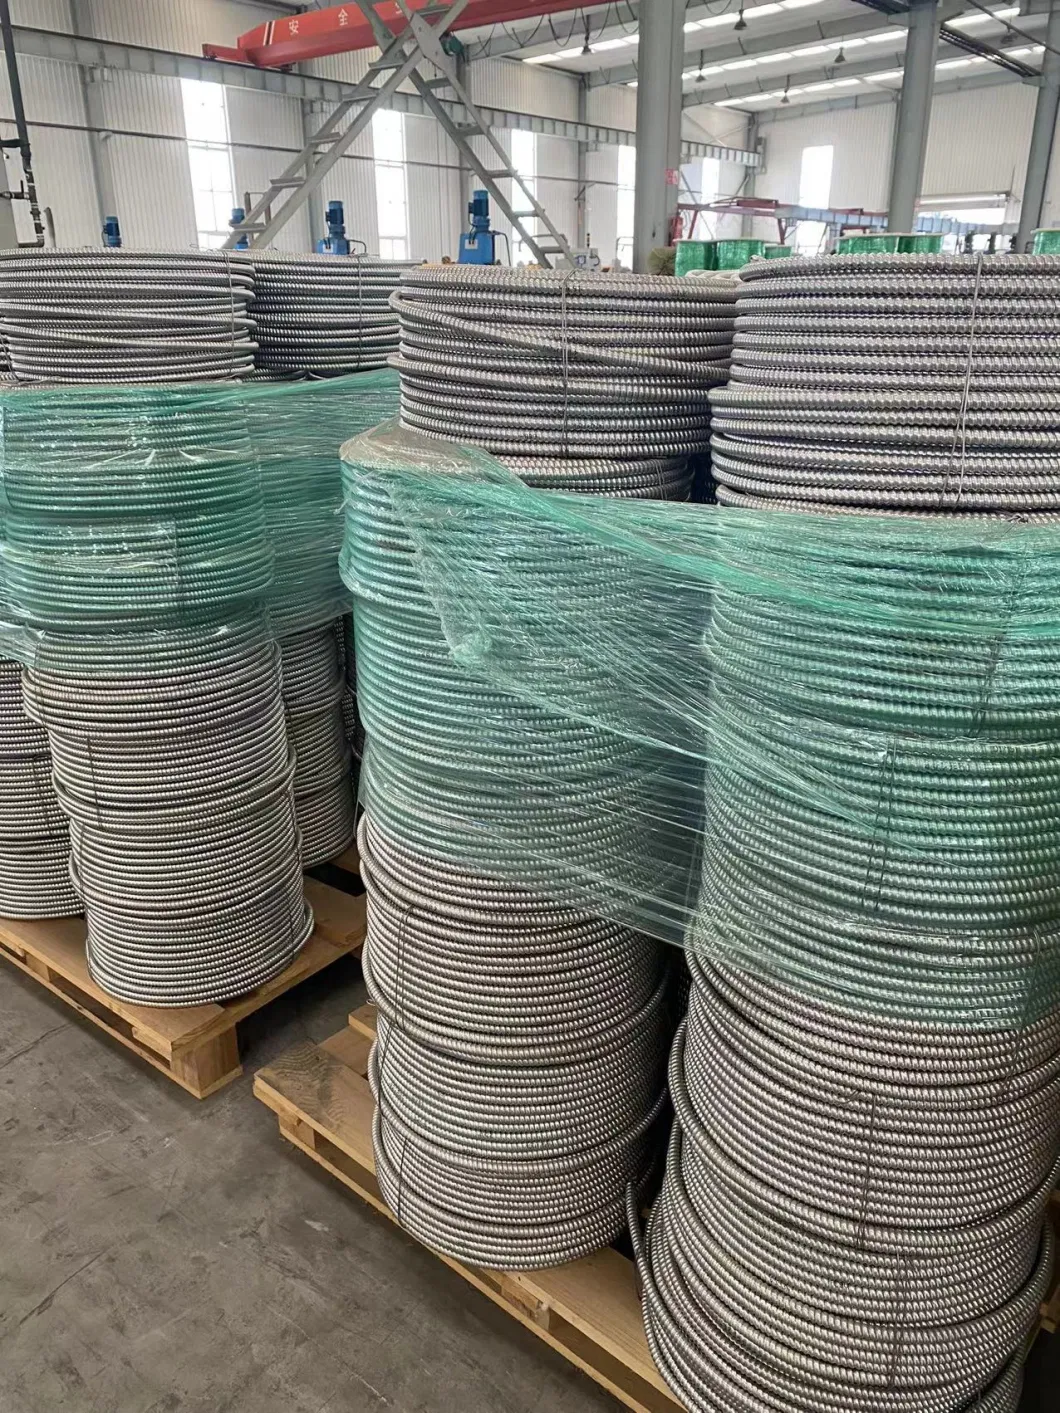 UL Low Voltage 1/0 2/0 3/0 4/0 Aluminum Armored Thhn/Thwn Conductors Green Insulated Grounding Electric Cable Mc Wire